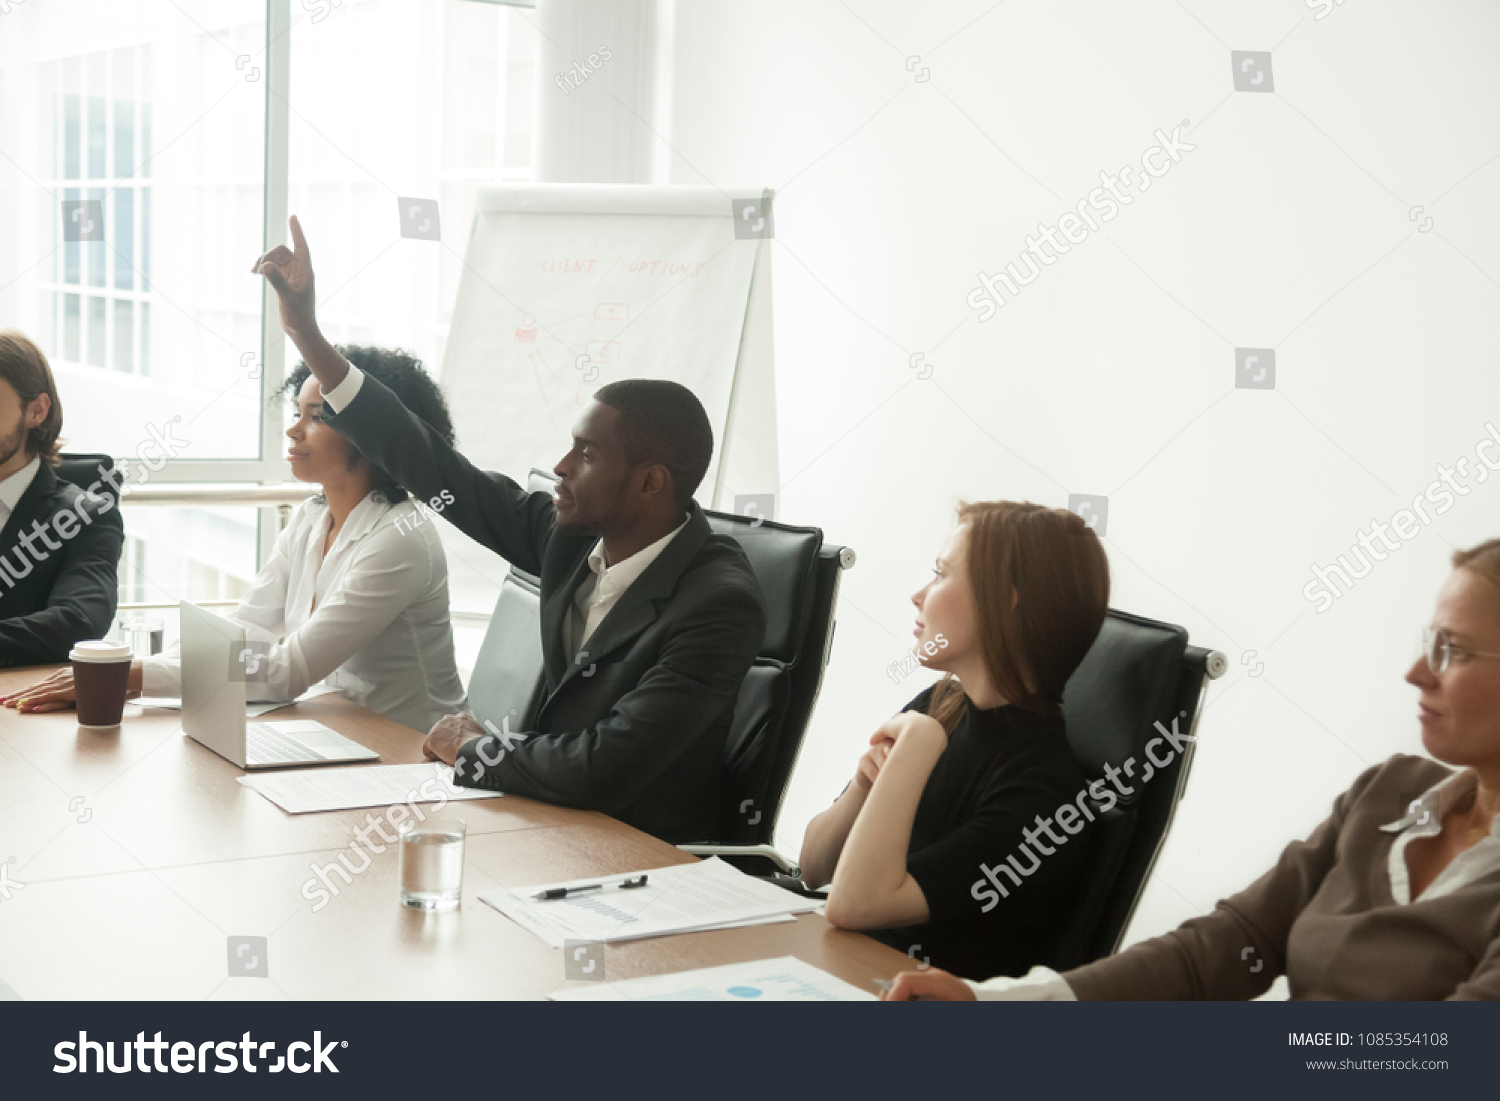 African businessman in suit raising hand at corporate diverse group meeting, black employee voting as volunteer asking question at business training sitting at conference table with multiracial team #1085354108